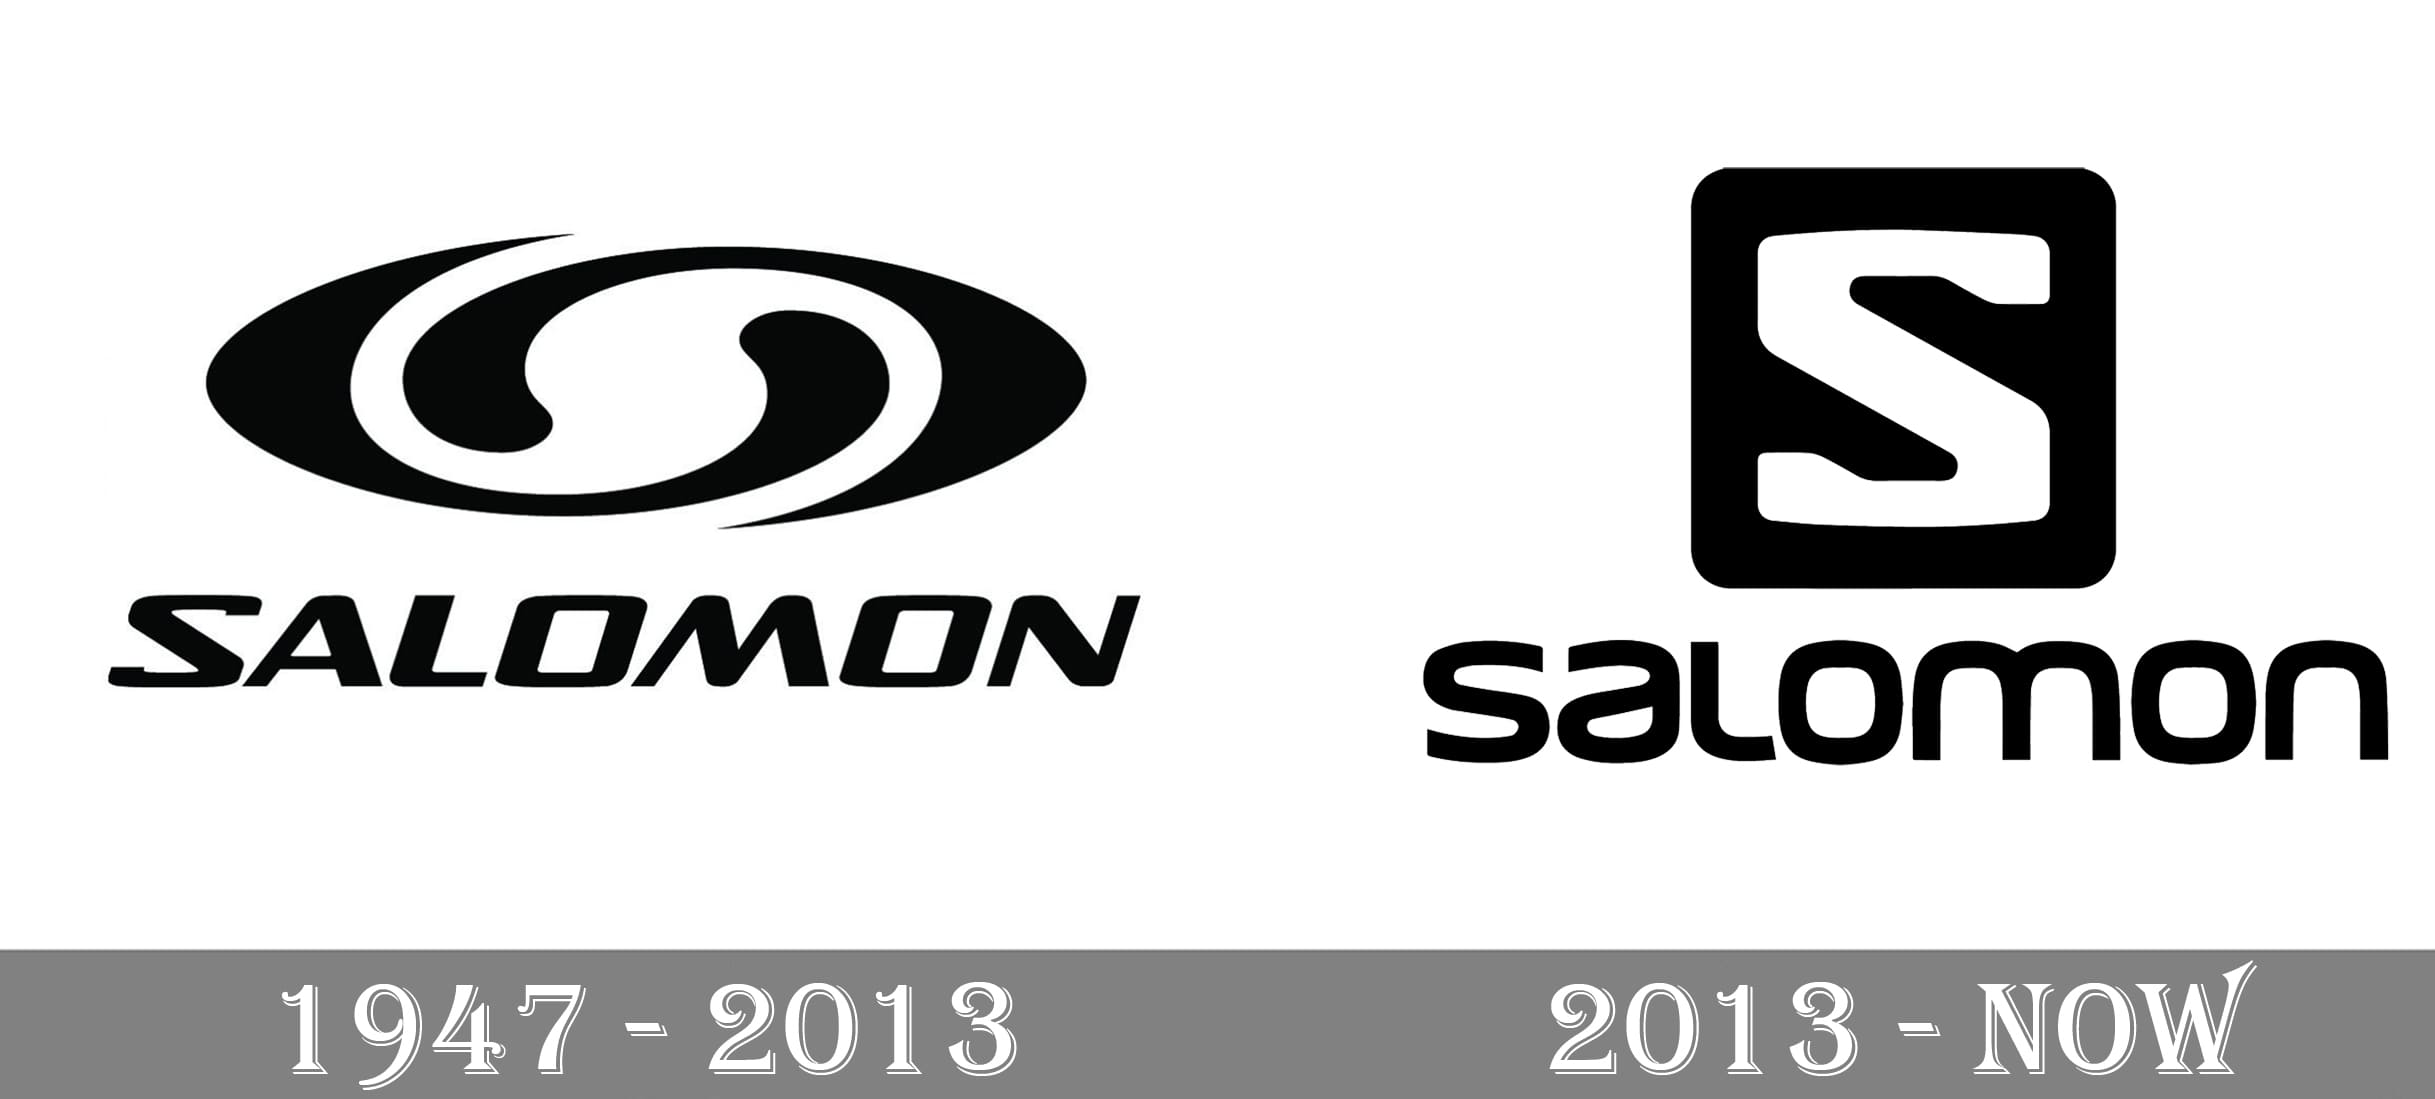 Salomon logo and meaning, history, PNG